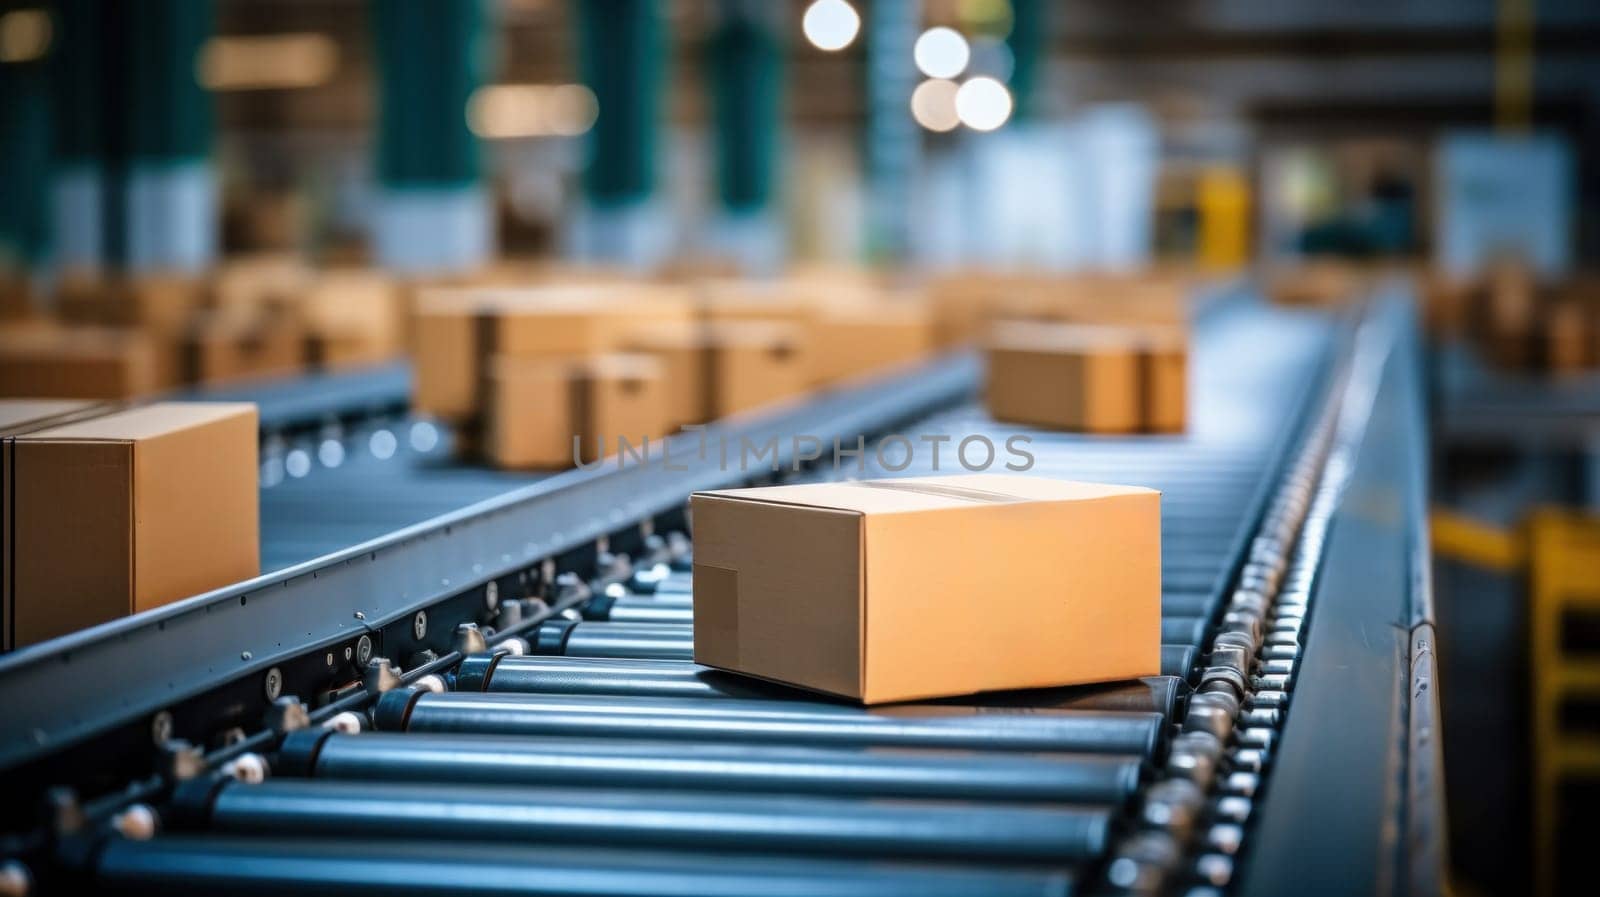 A conveyor belt with boxes on it in a factory